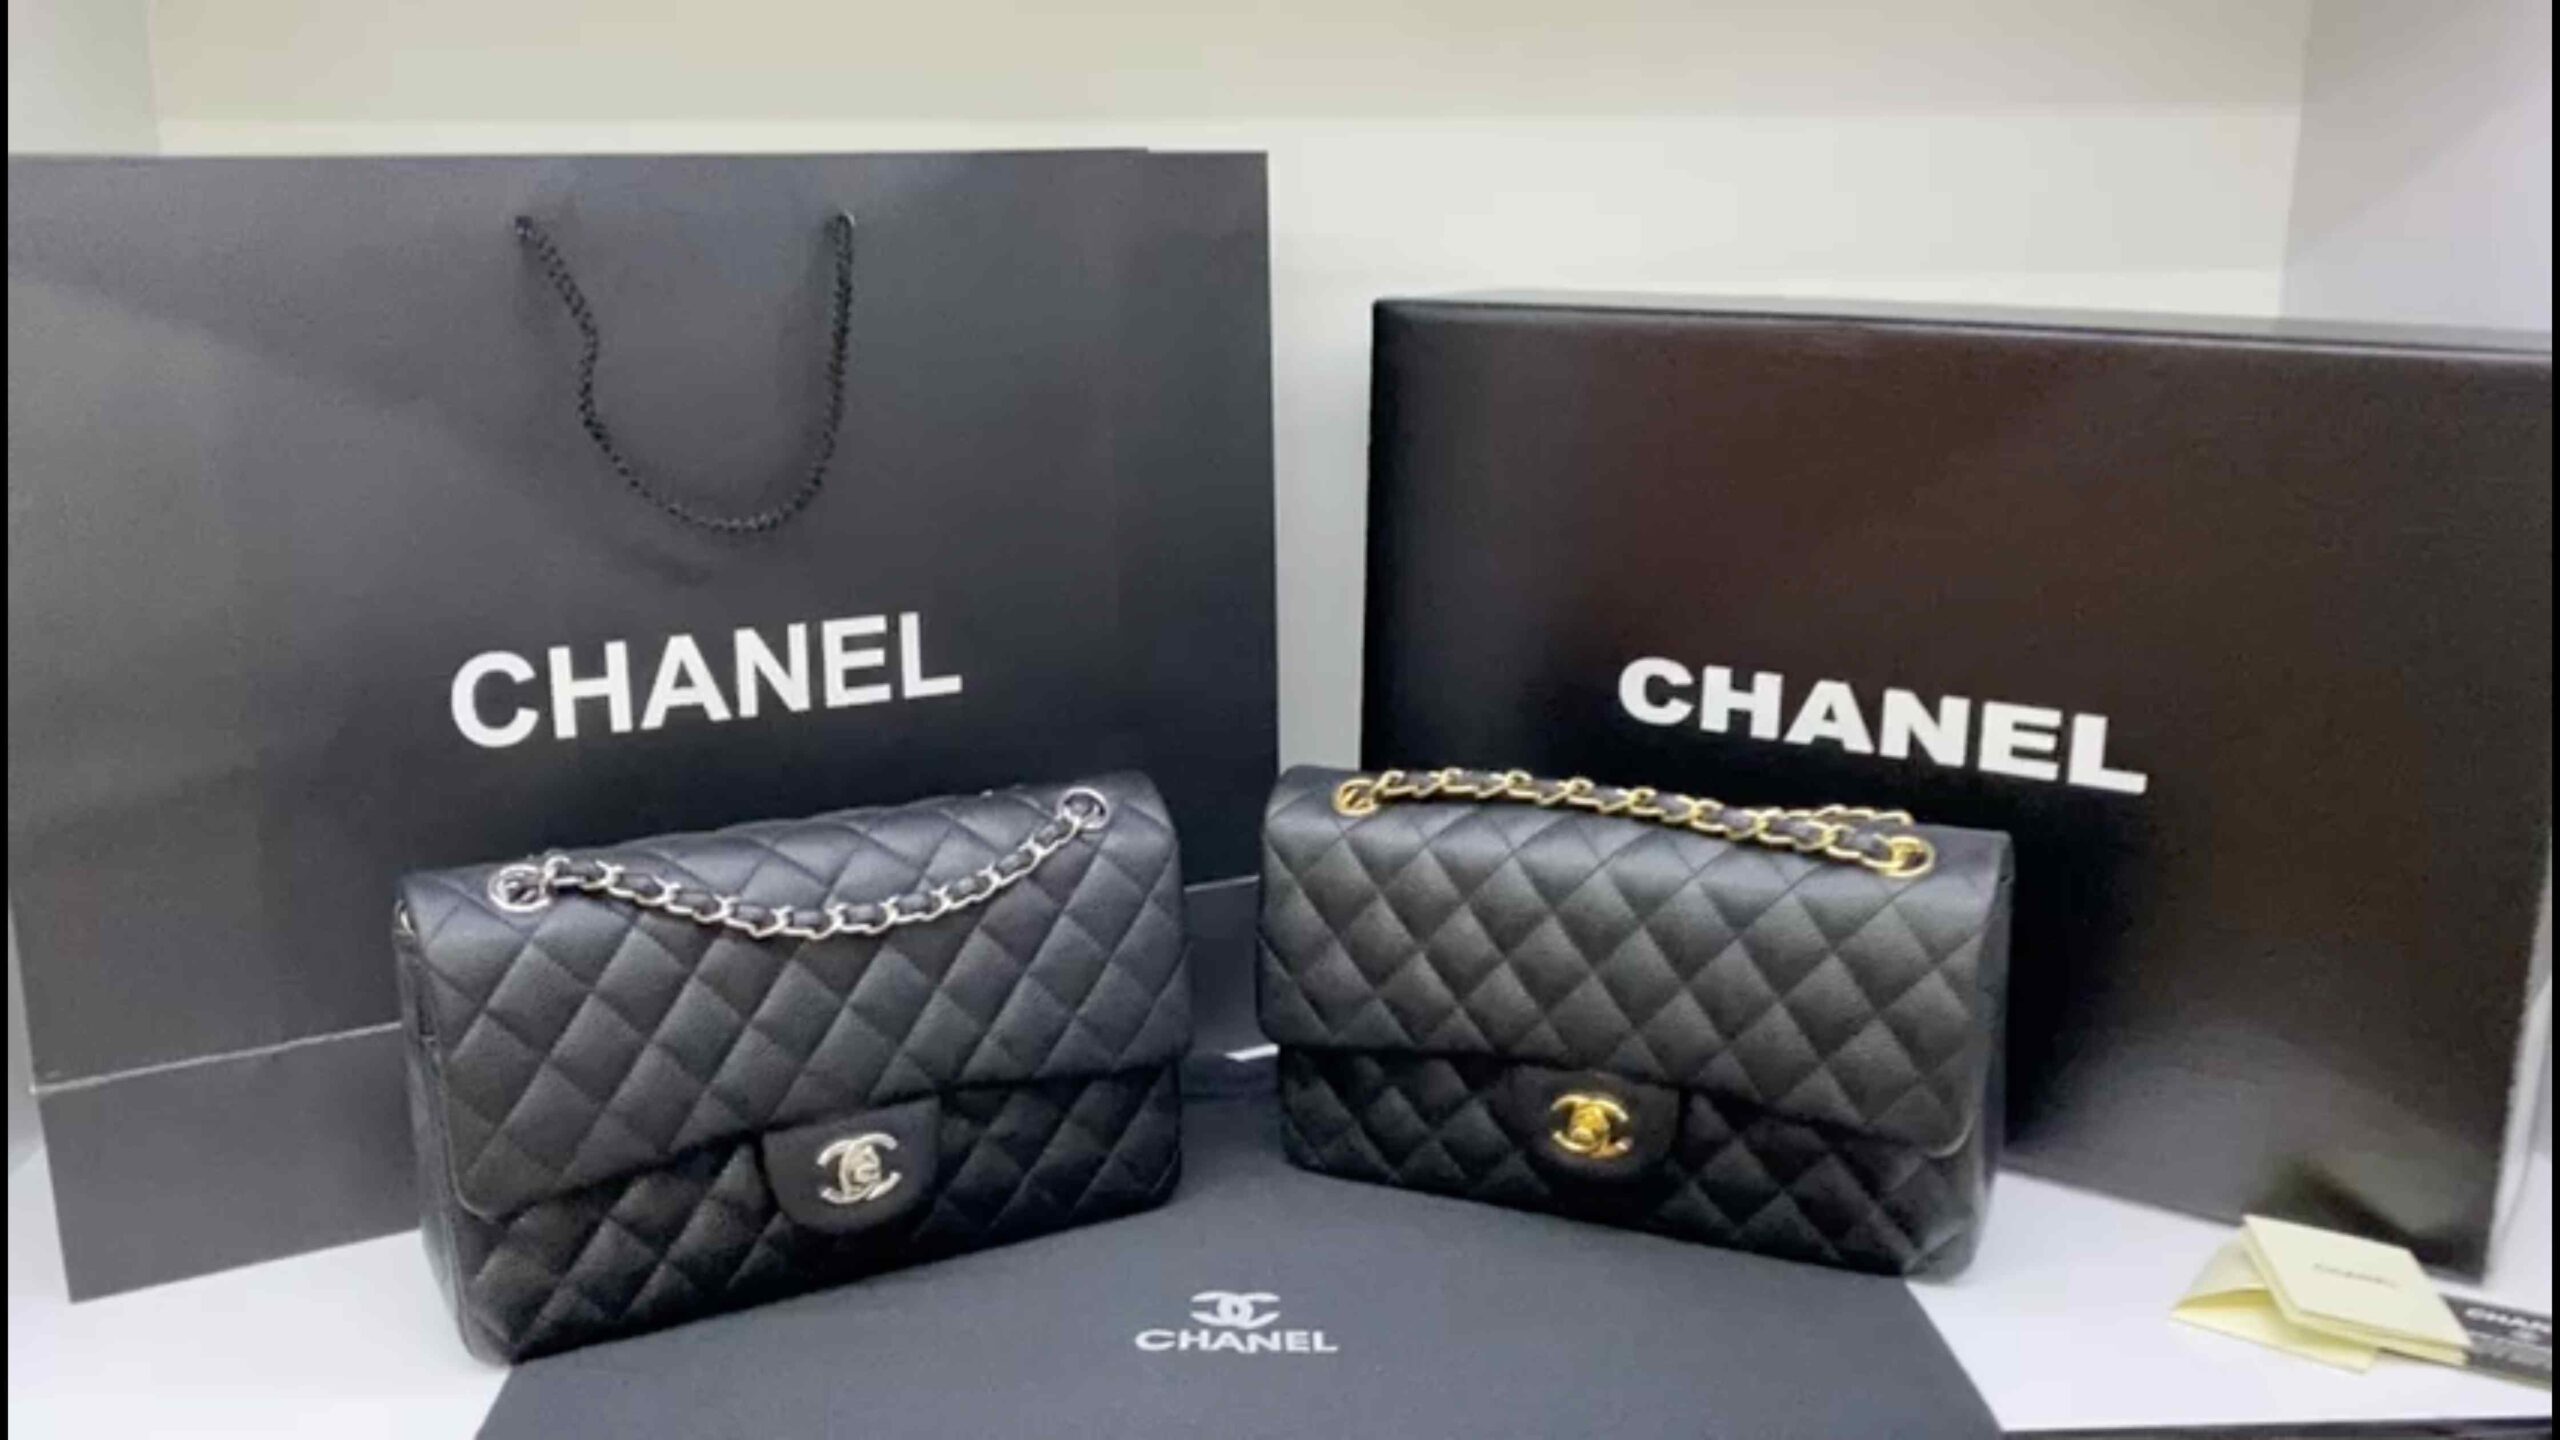 CHANEL 2-55 size